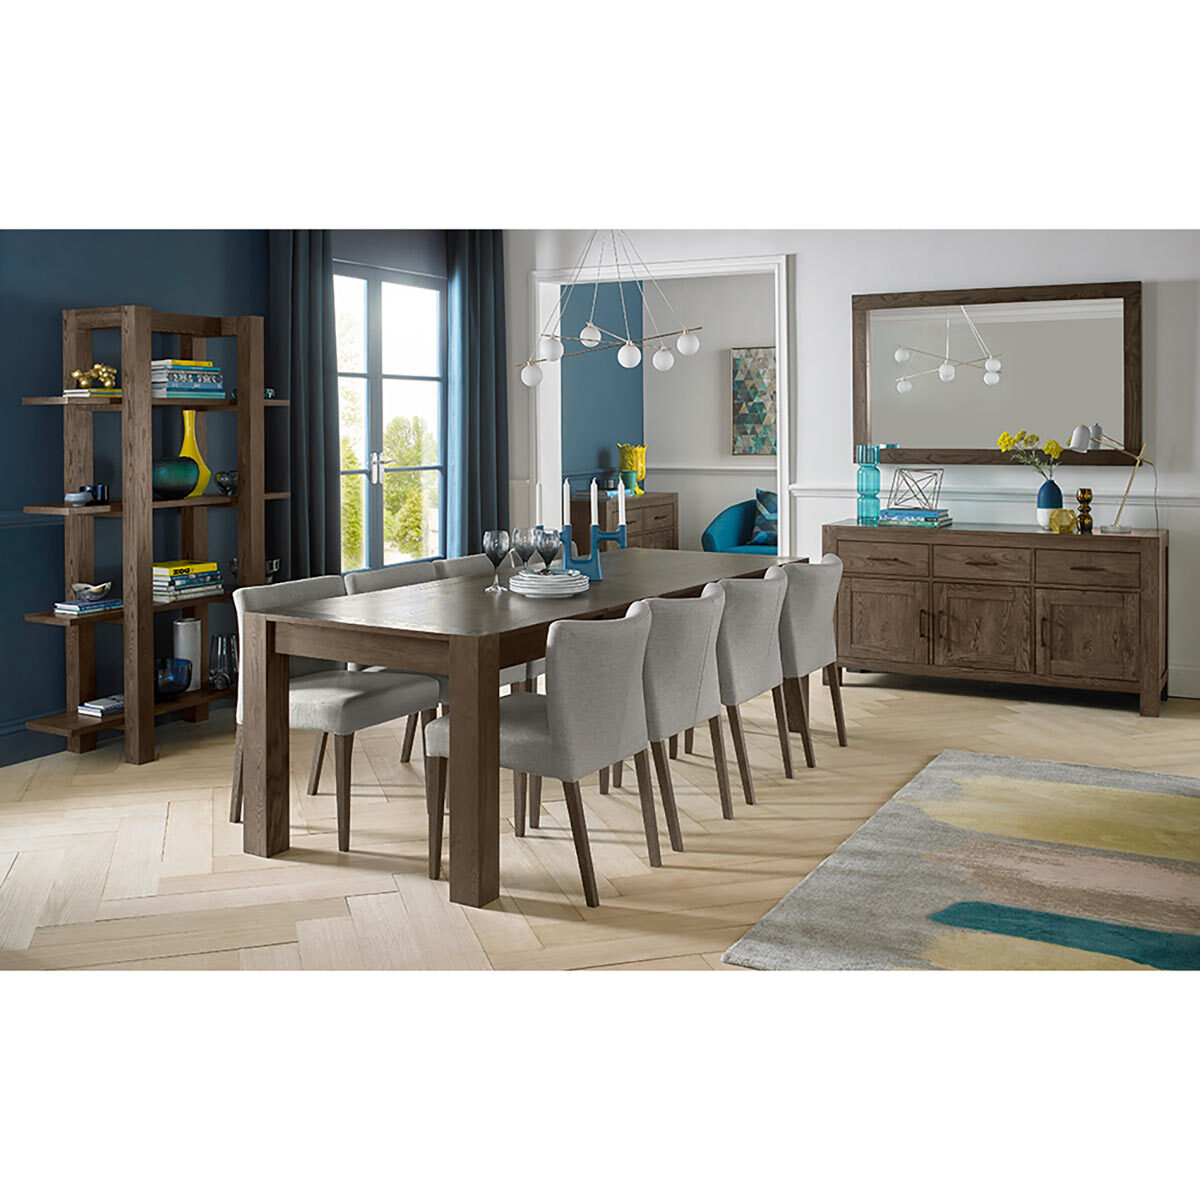 Lifestyle image of Milan Dingin table with low back upholstered chairs